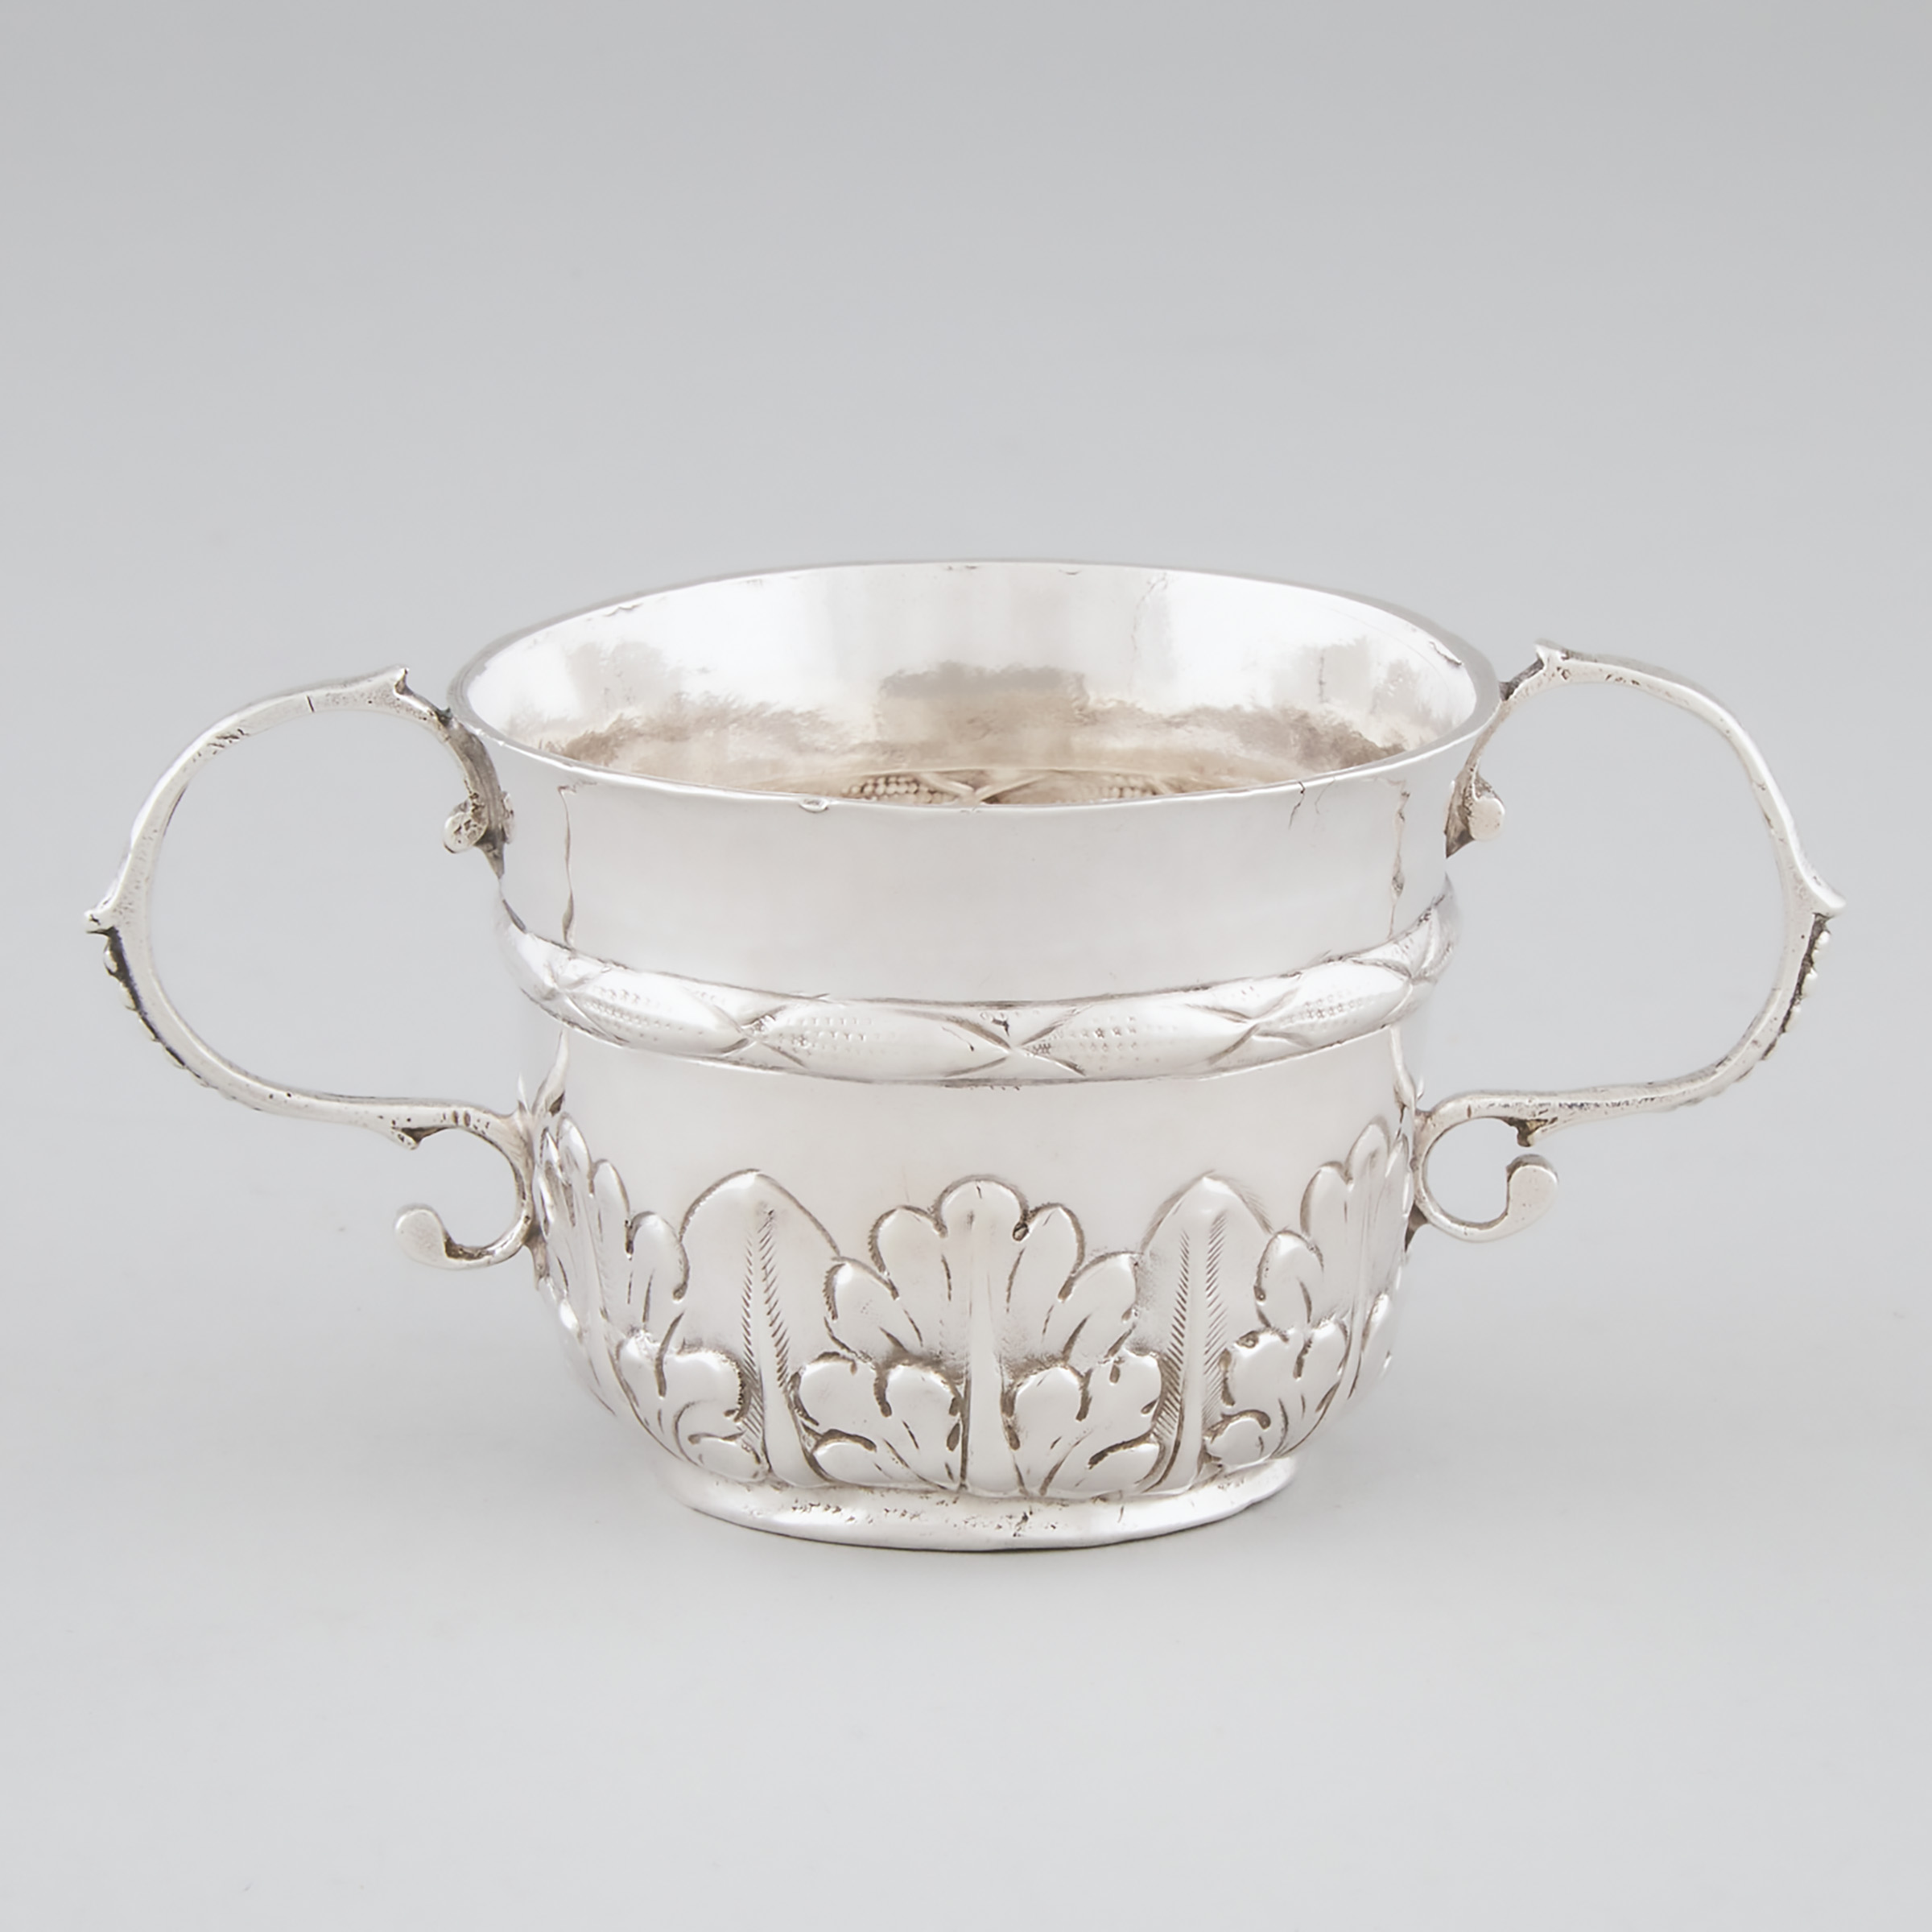 William & Mary Silver Caudle Cup, London, 1690